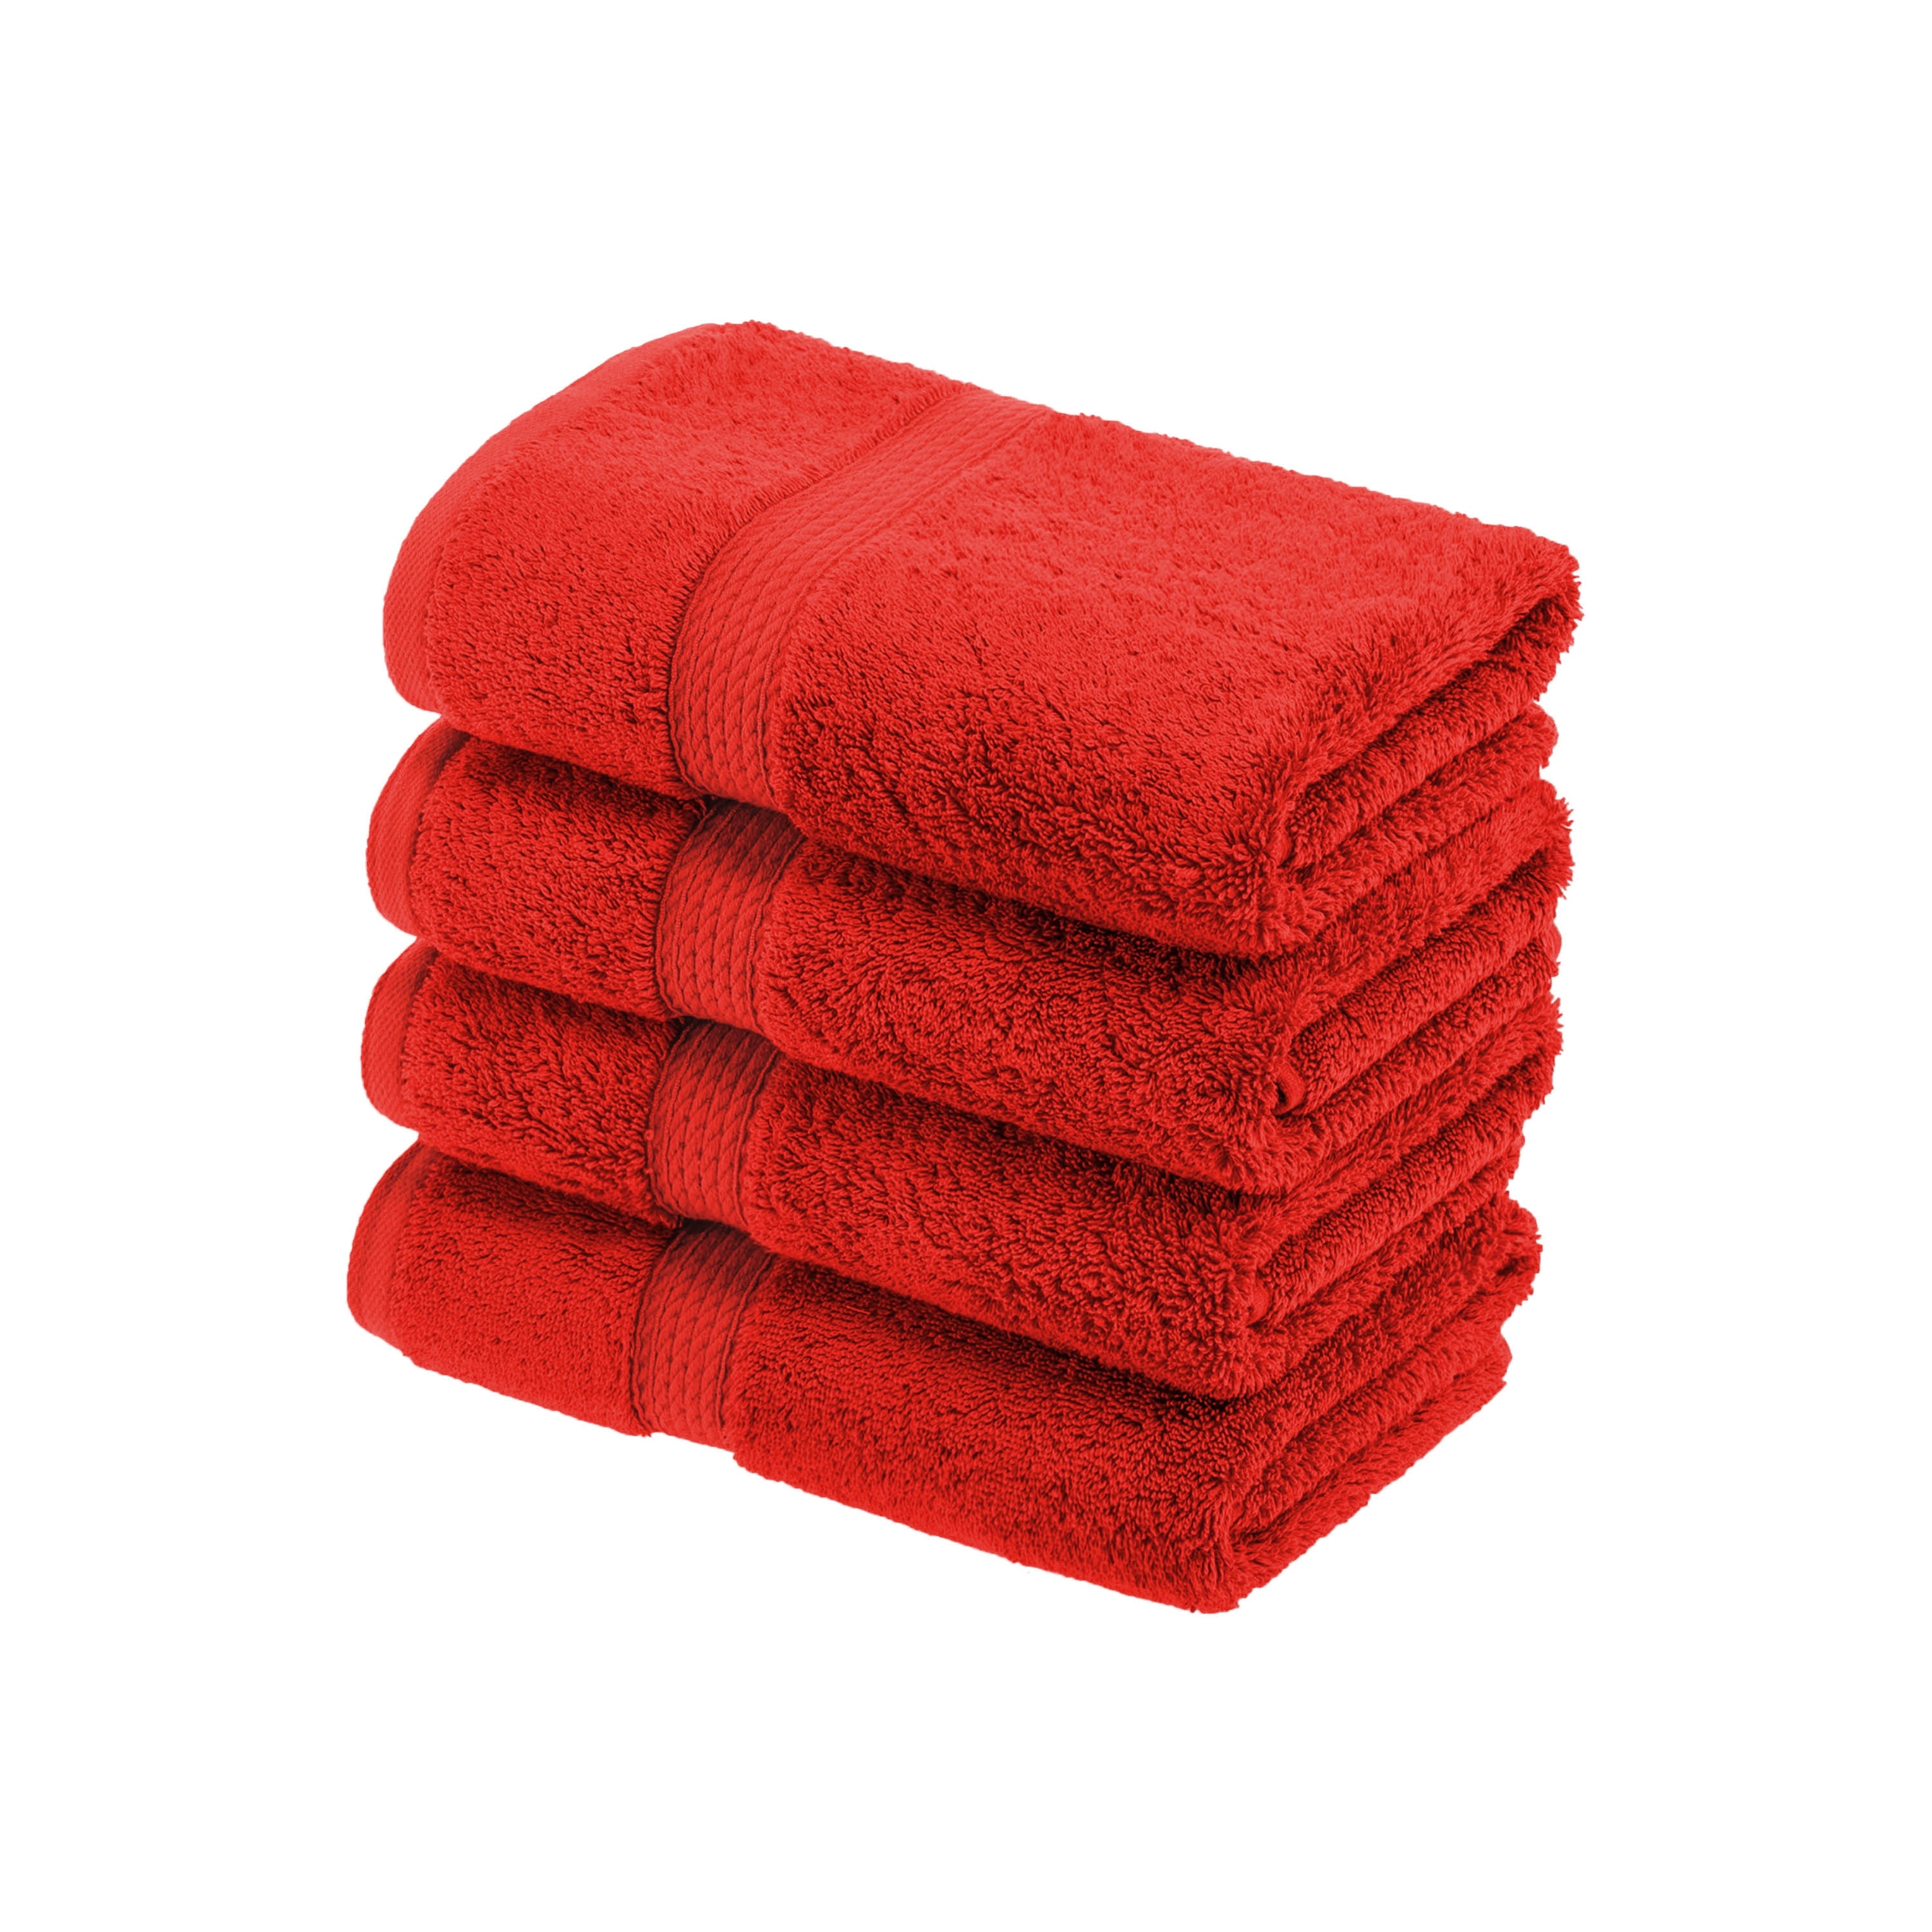 https://ak1.ostkcdn.com/images/products/is/images/direct/5681a878809ed3ee7e71338961a35bb197b2b9a7/Marche-Egyptian-Cotton-4-Piece-Hand-Towel-Set-by-Miranda-Haus.jpg